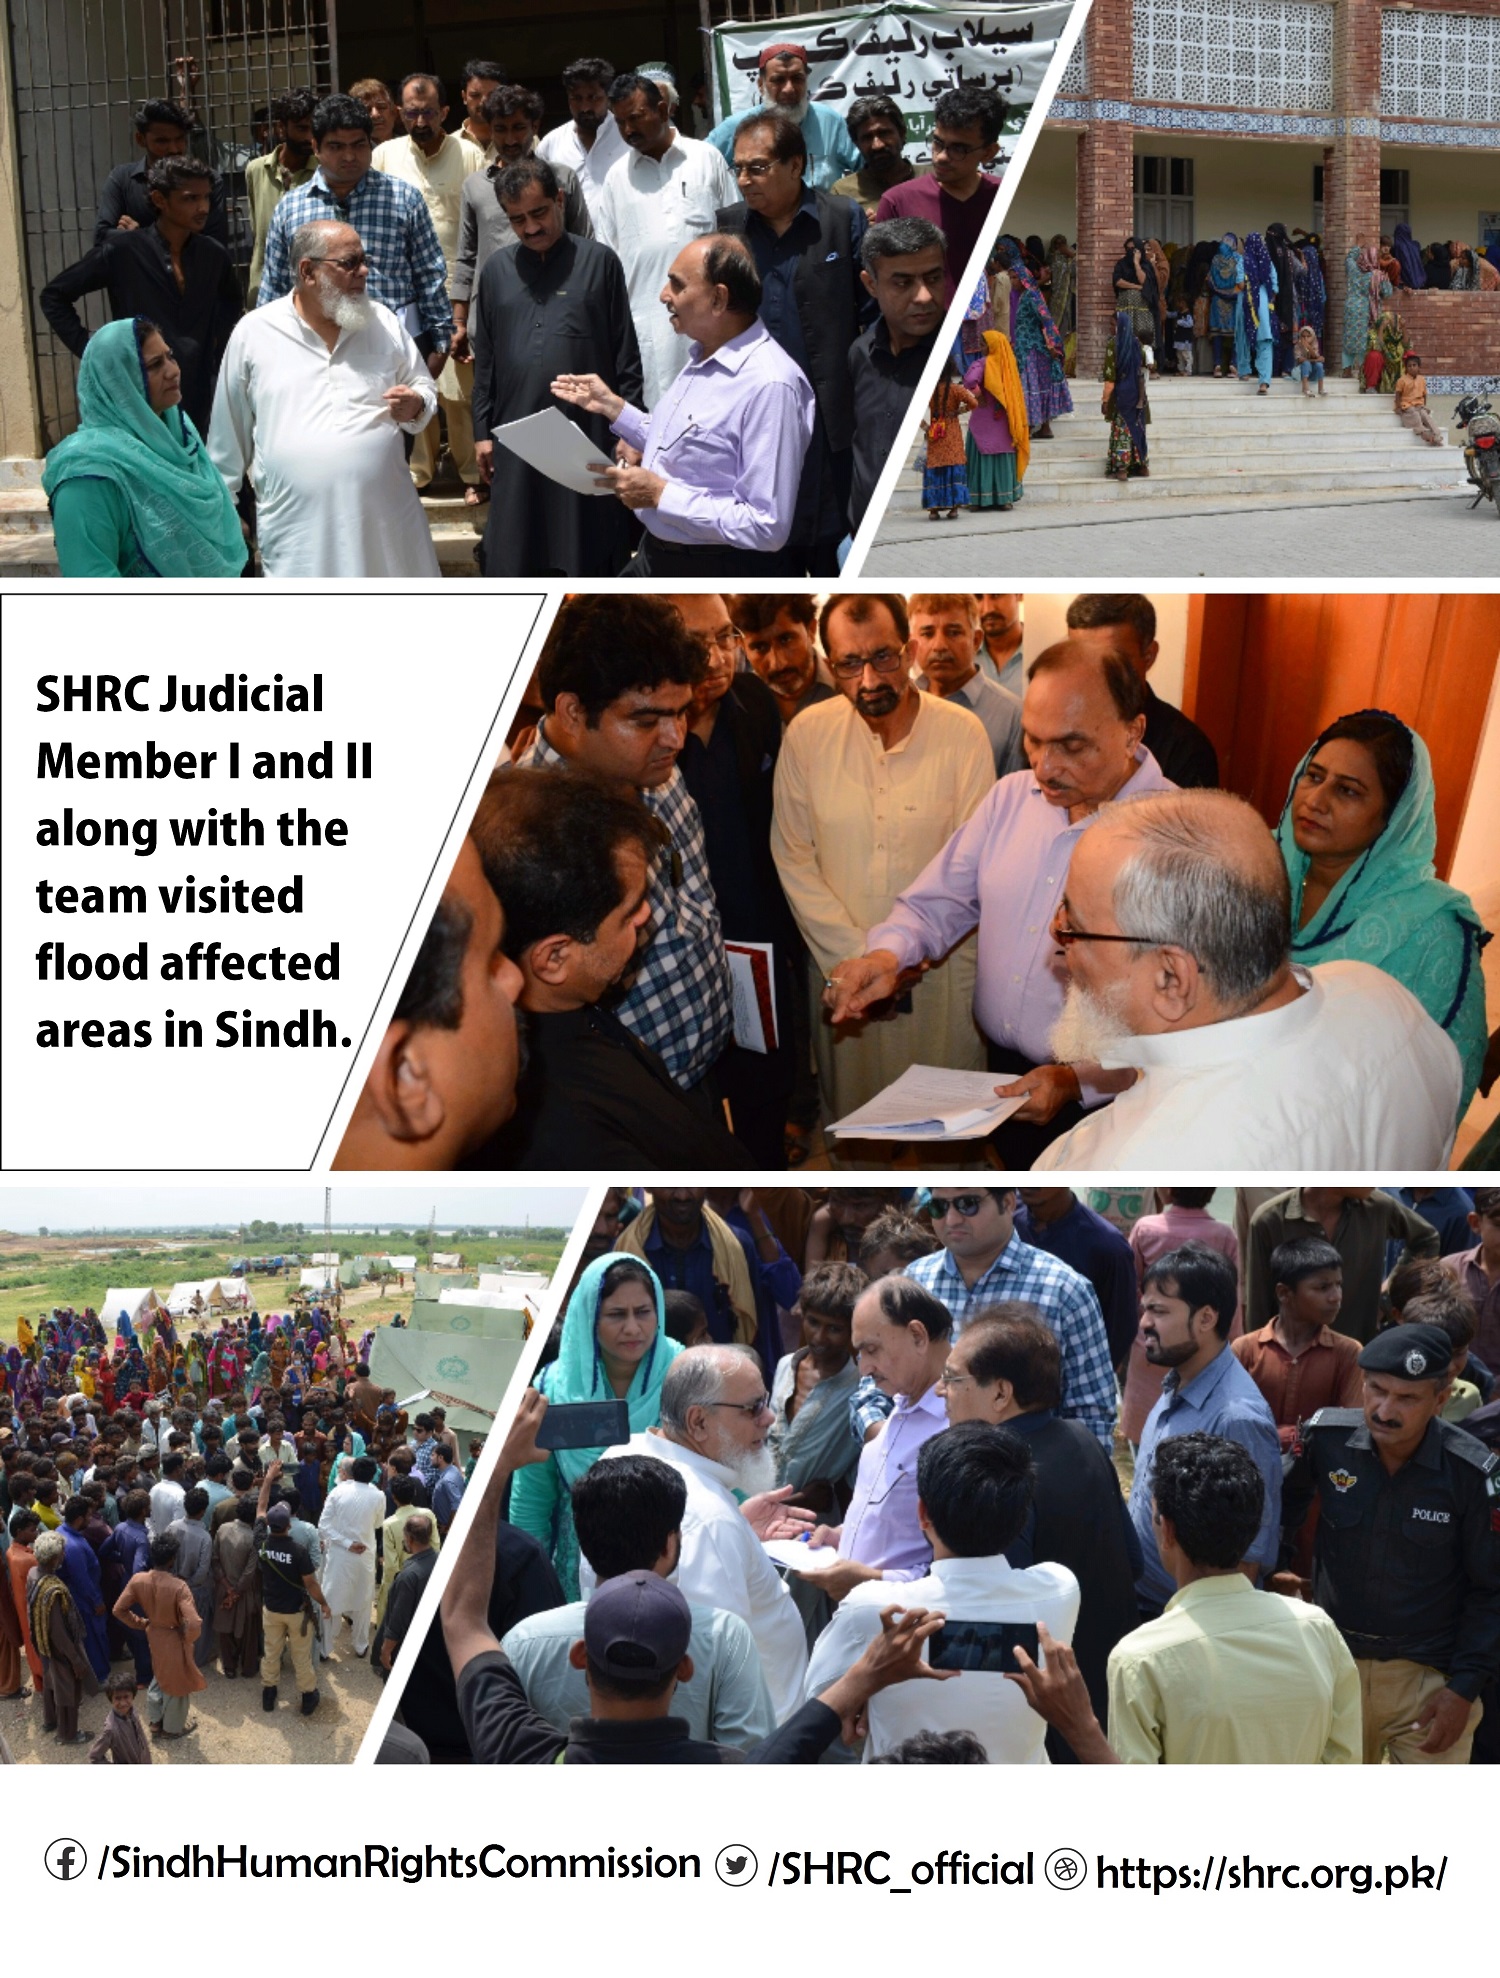 SHRC Judicial member I and II along with the team visited flood affected areas in Hyderabad, Sindh.